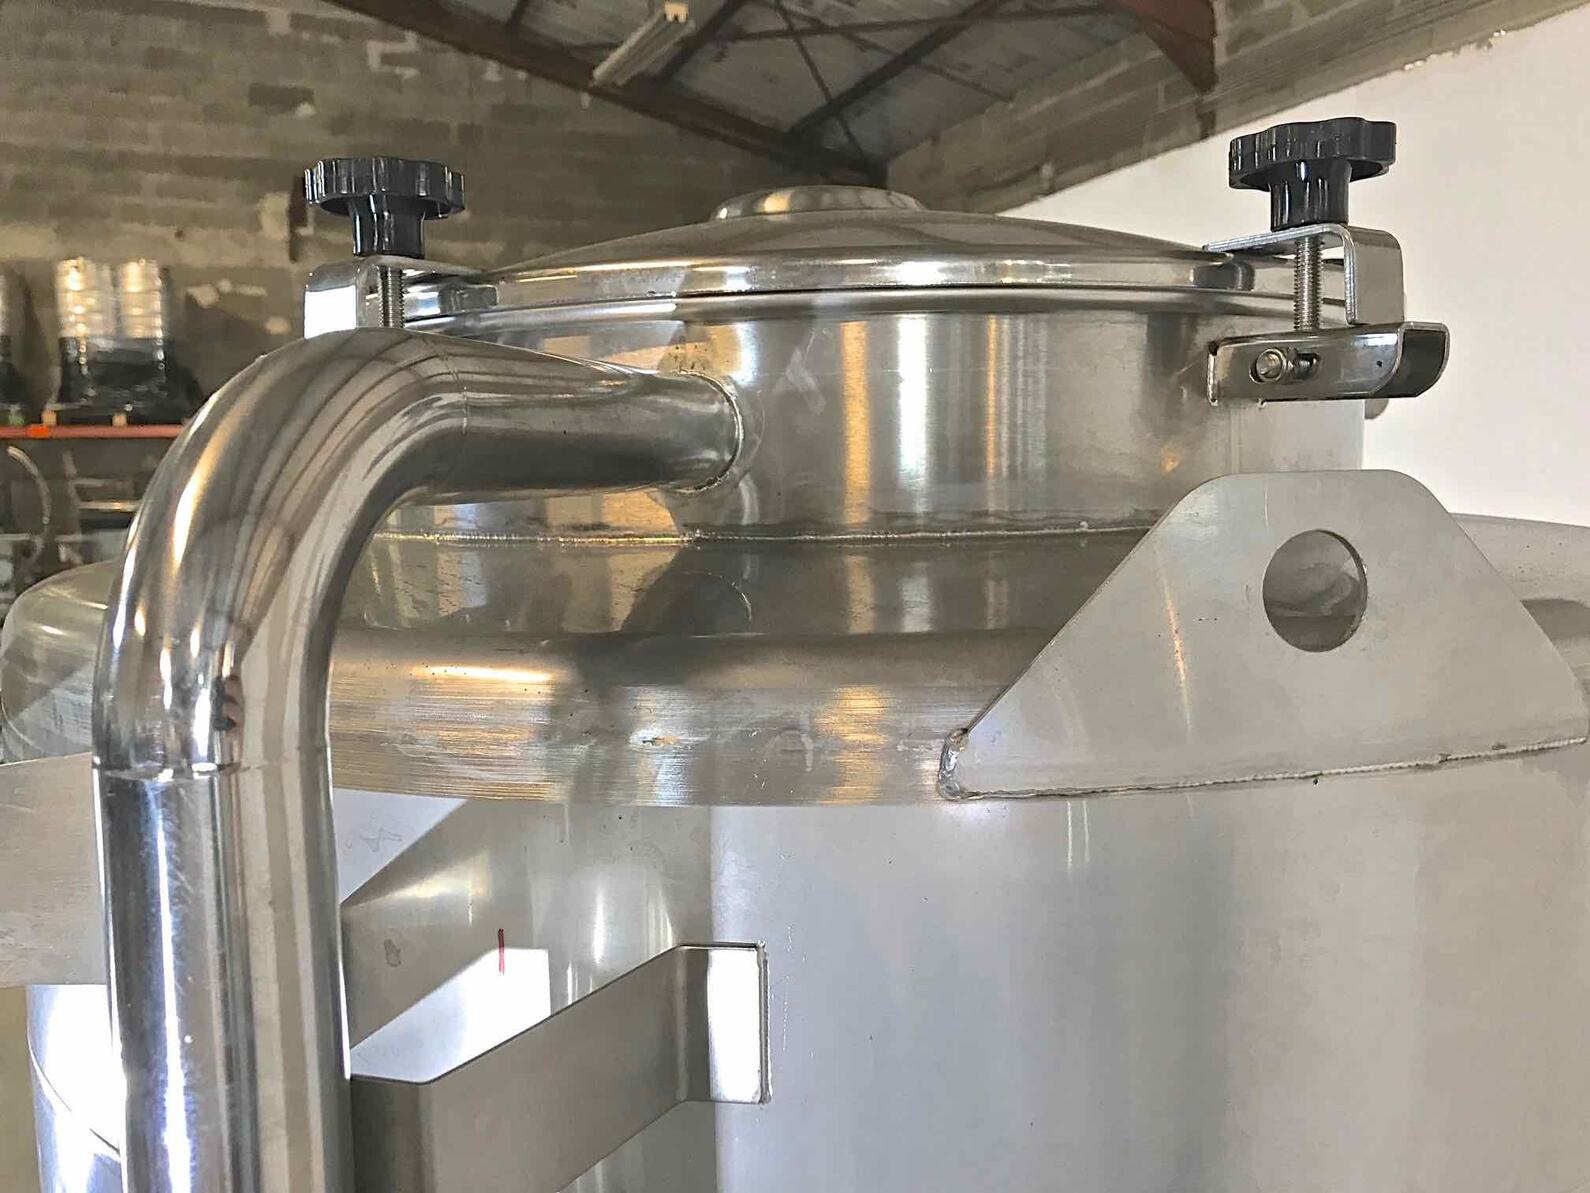 304 stainless steel tank - Closed - On feet - Cylindrical-conical